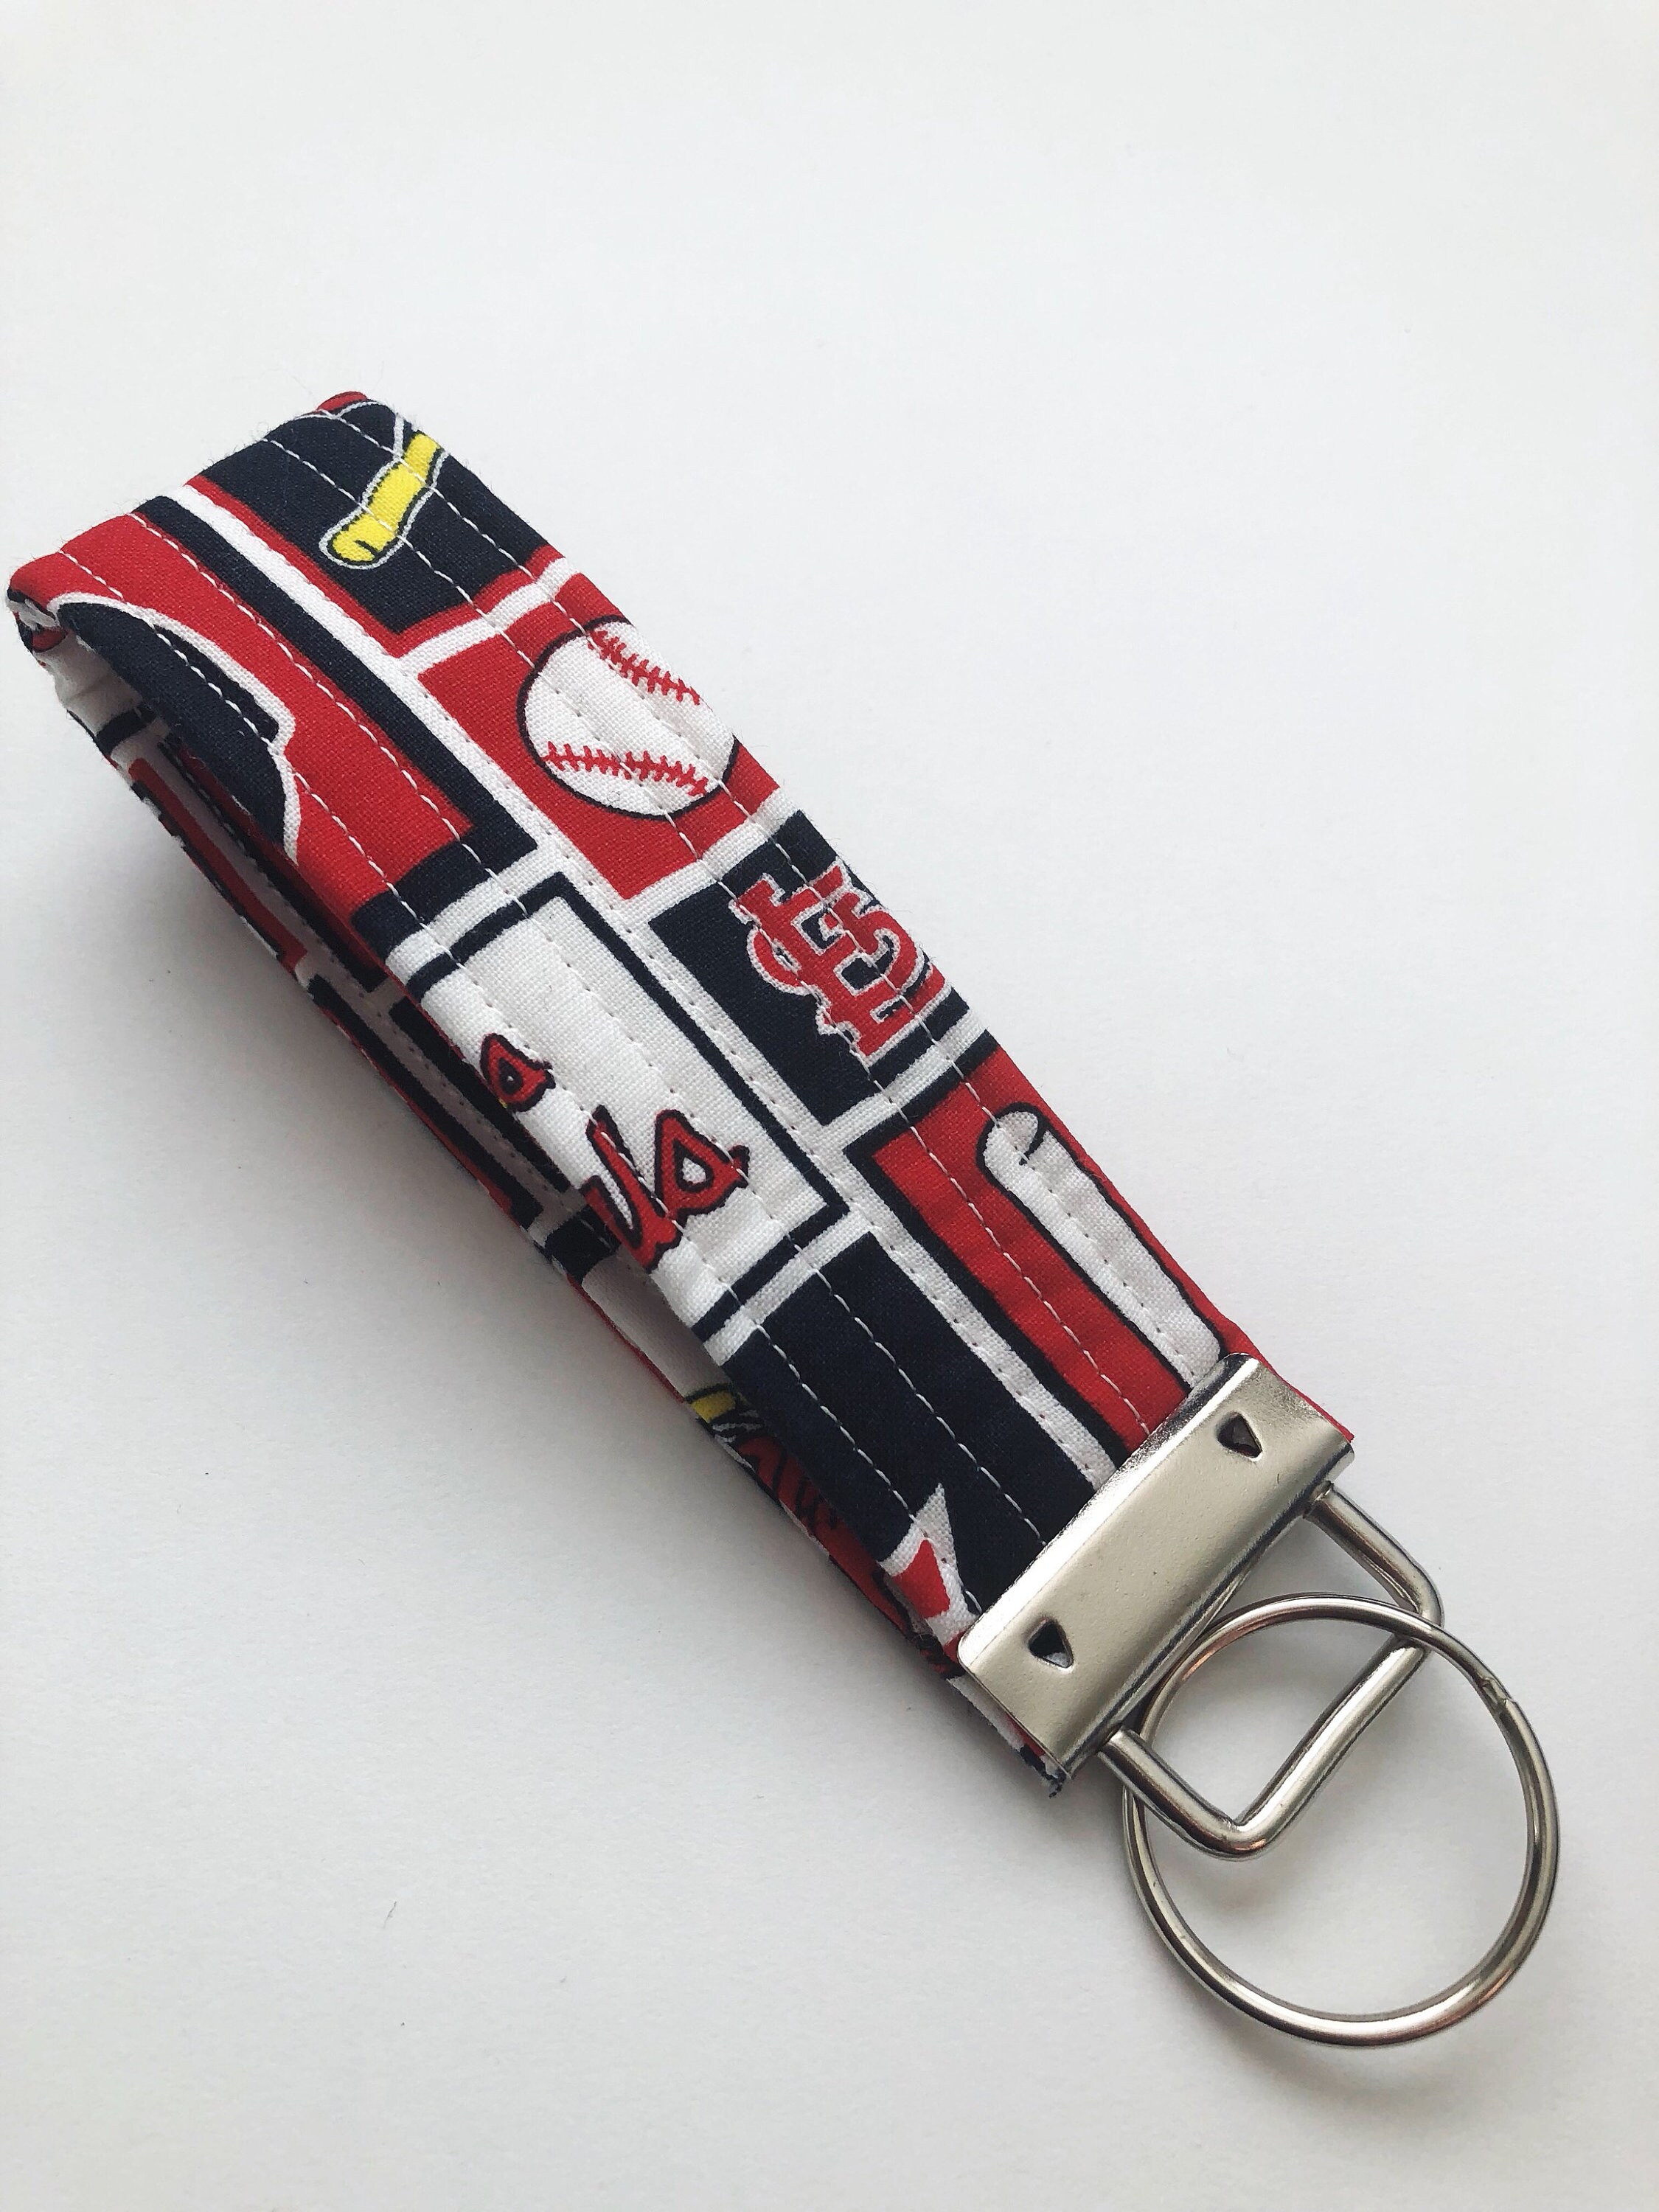 St. Louis Cardinals lanyard keychain key holder new without tag baseball  team